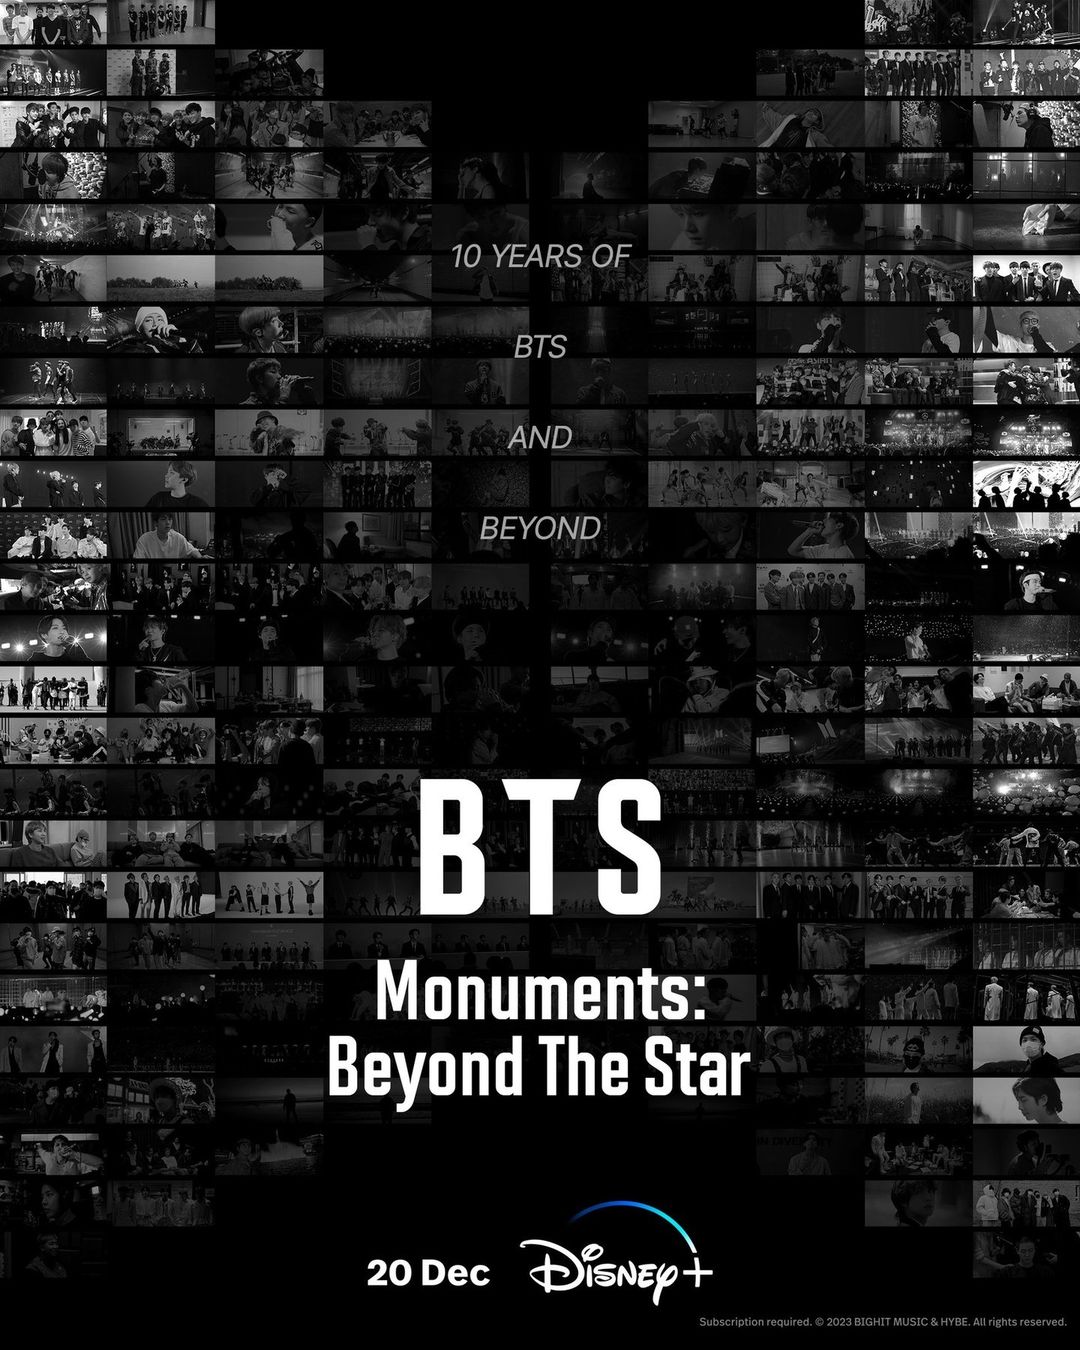  BTS Monuments Beyond the Star TV Series 2023, Official Trailer